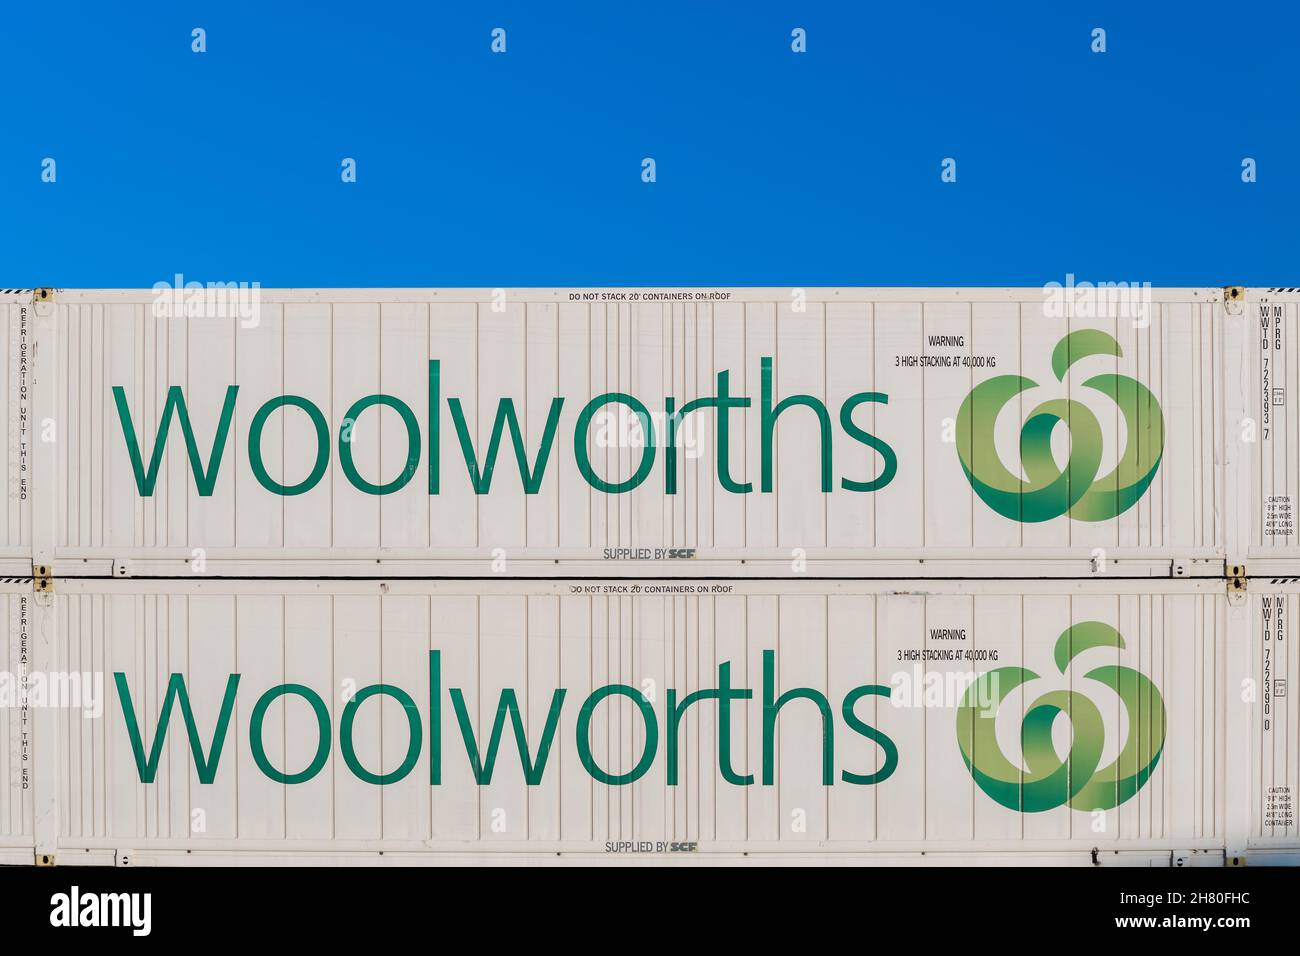 Adelaide, Australia - February 16, 2020: Woolworths refrigerated shipping containers stacked against blue sky on a day Stock Photo